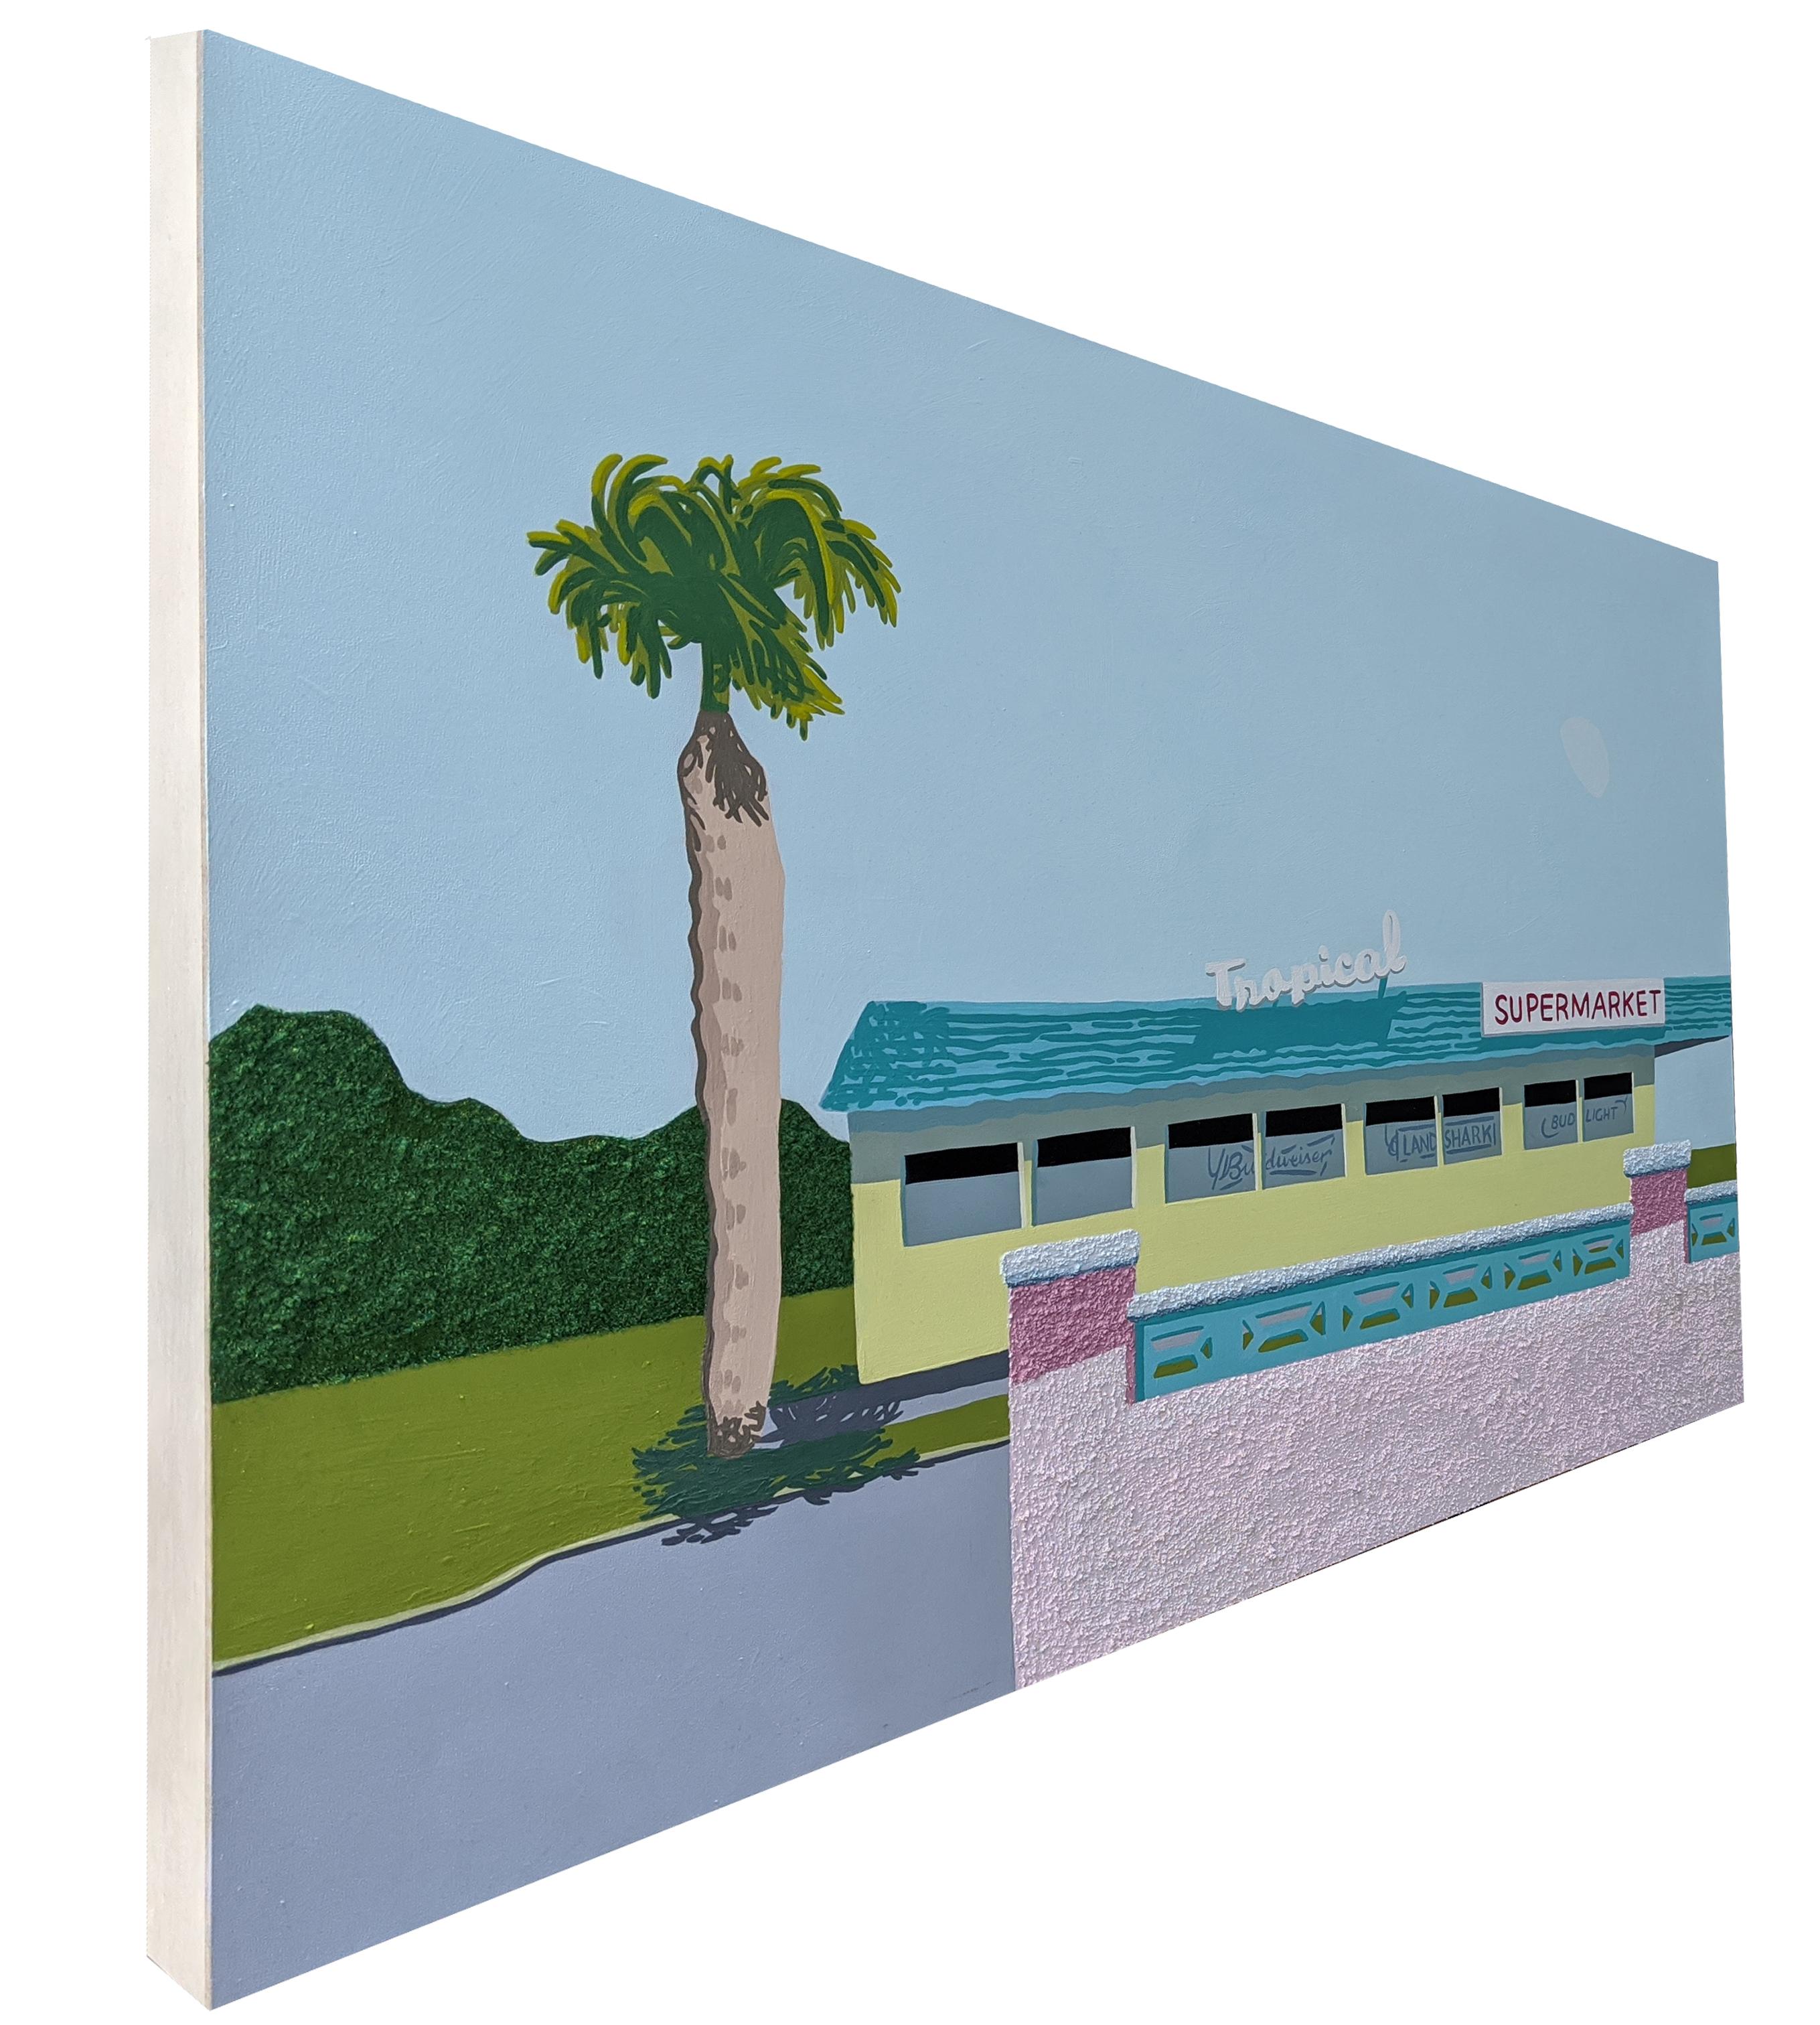 Tropical Supermarket - landscape painting - Painting by Honor Bowman Hall